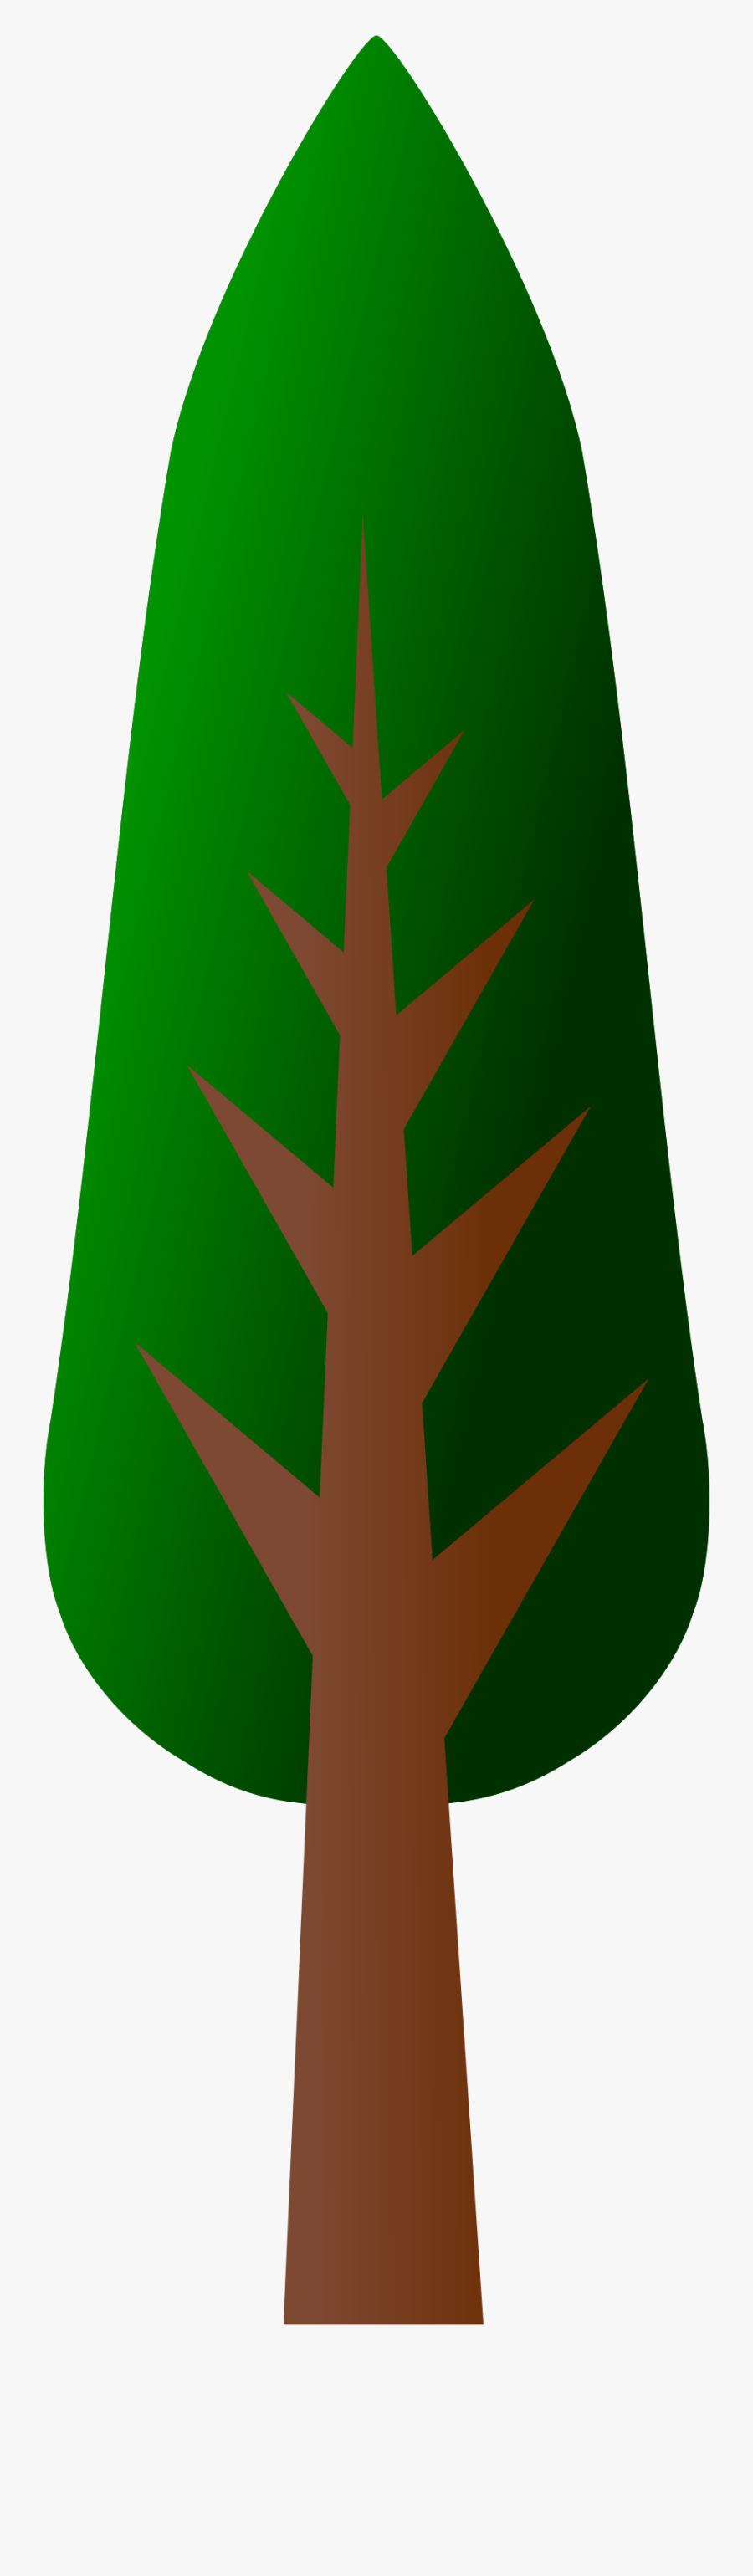 Pine Tree Clipart Long Tree - Clipart Tall Tree Png, Transparent Clipart